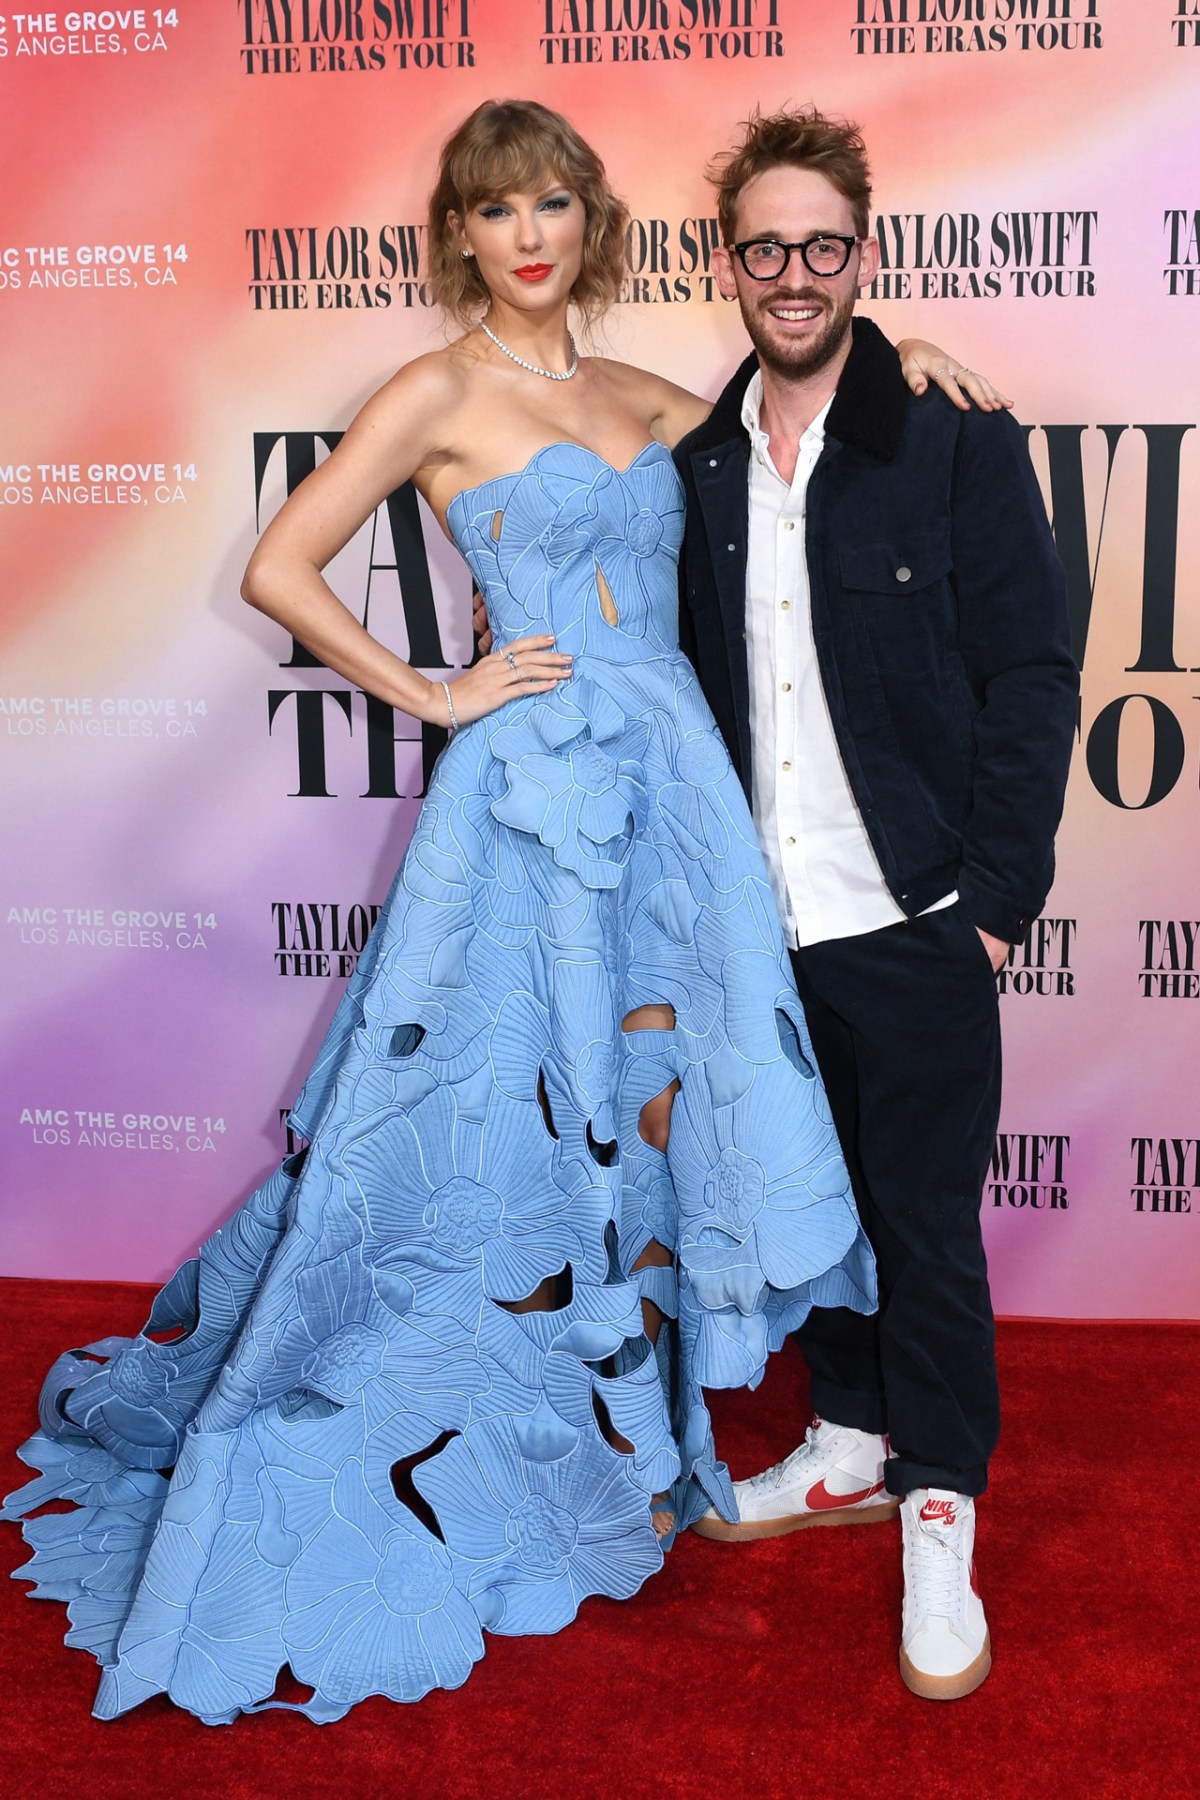 Taylor Swift: The Eras Tour' Movie Premiere: Stars on the Red Carpet